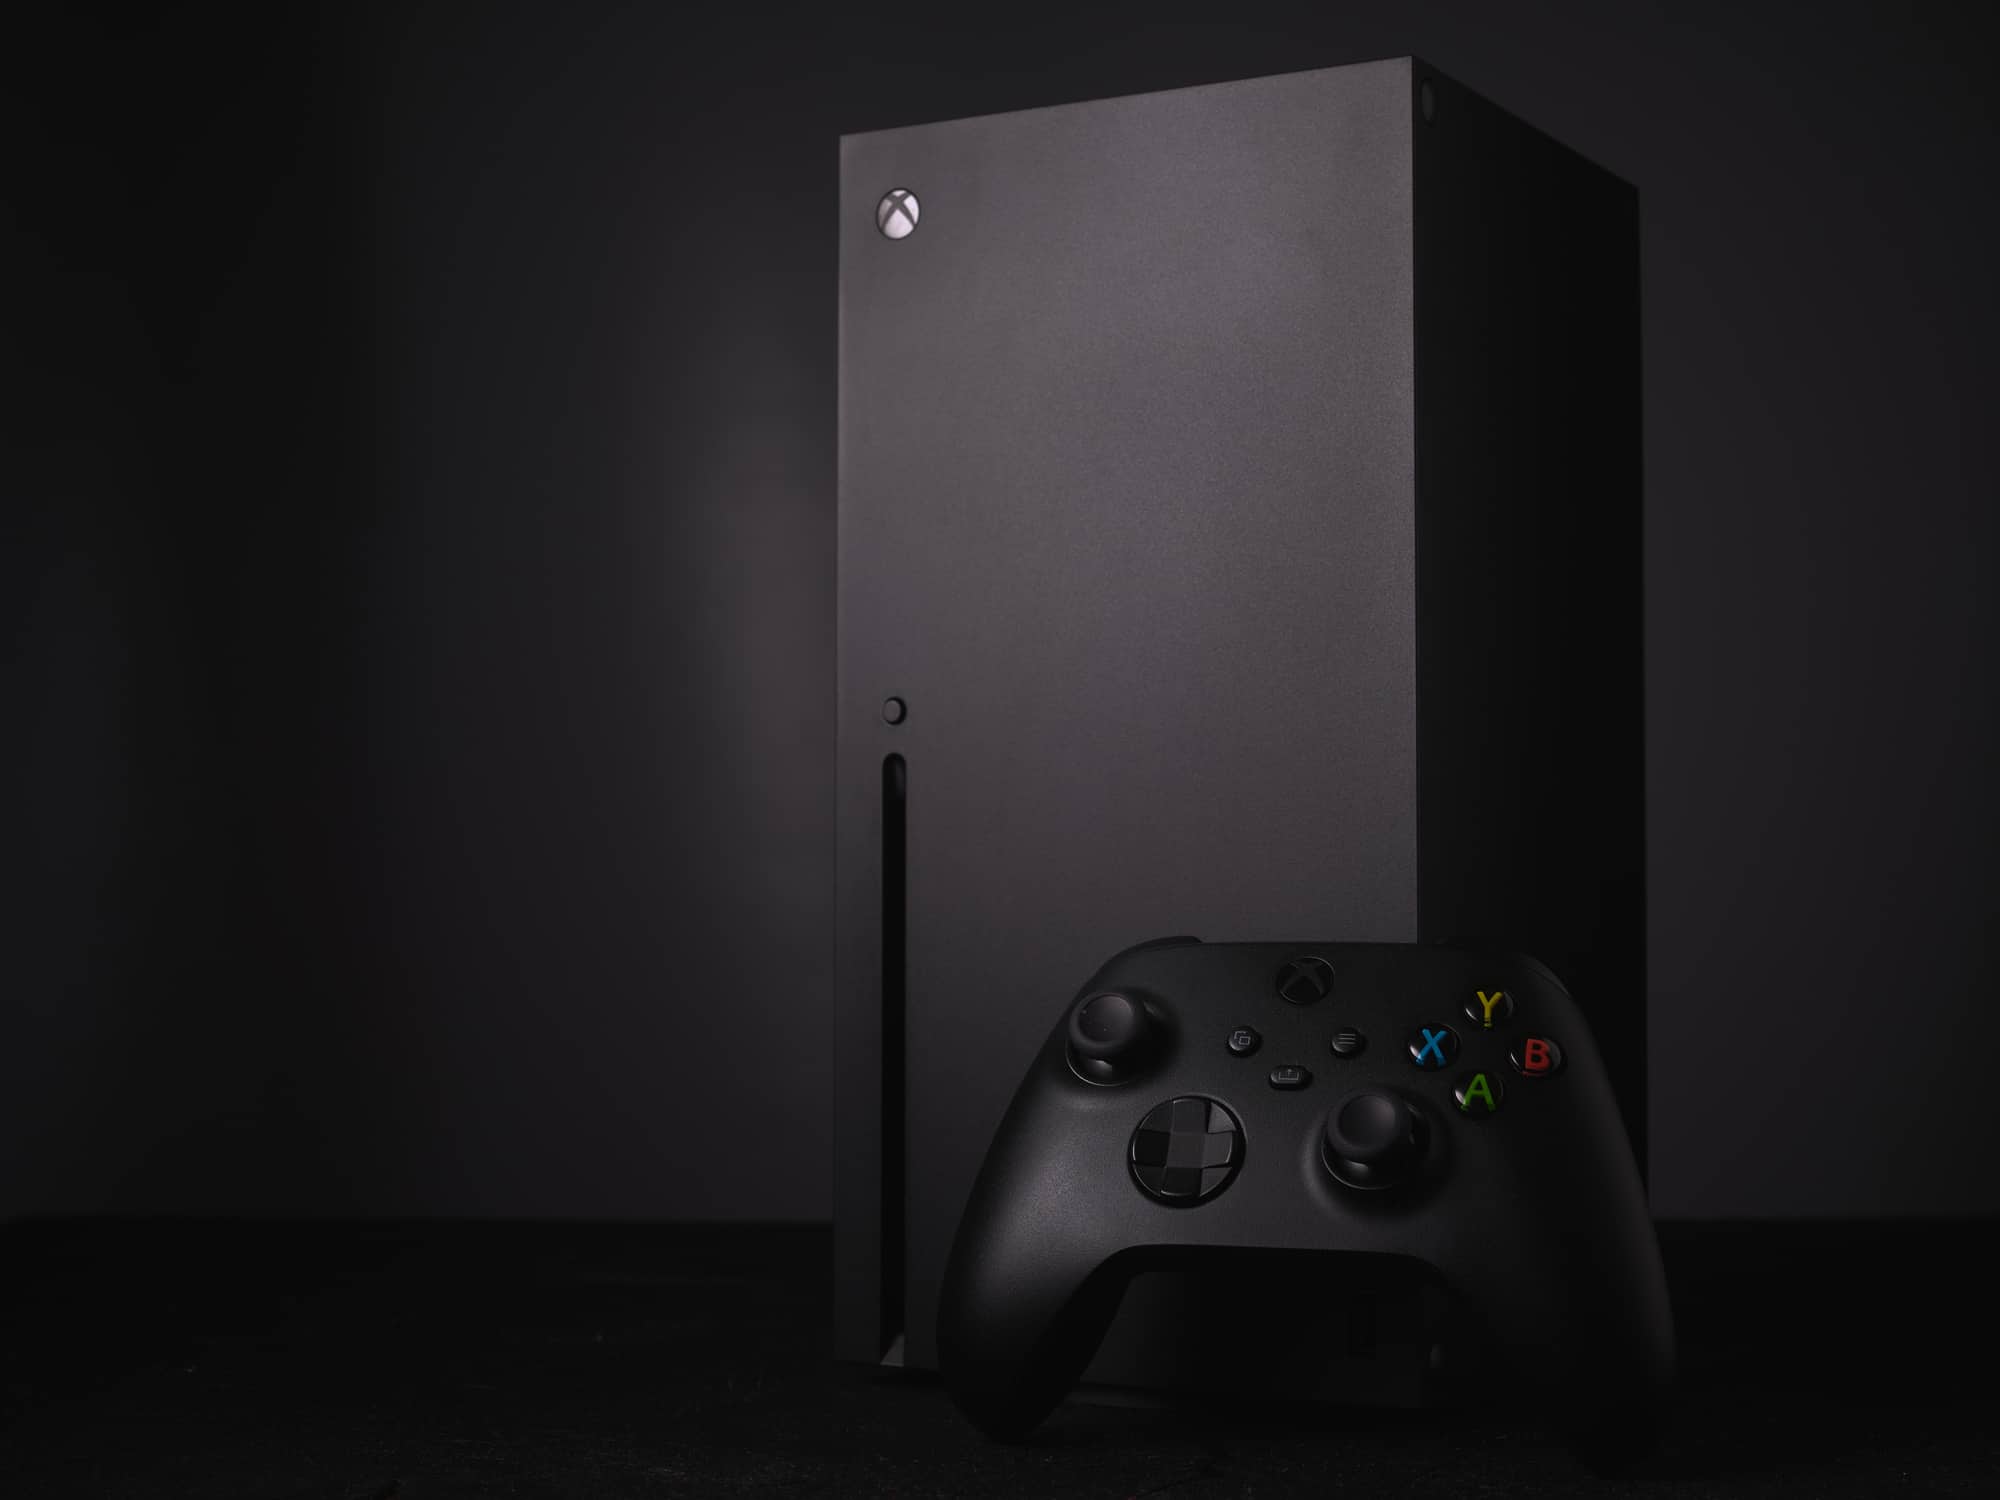 The TIM catalog is enriched with the Xbox Series X | S in thumbnail promotion